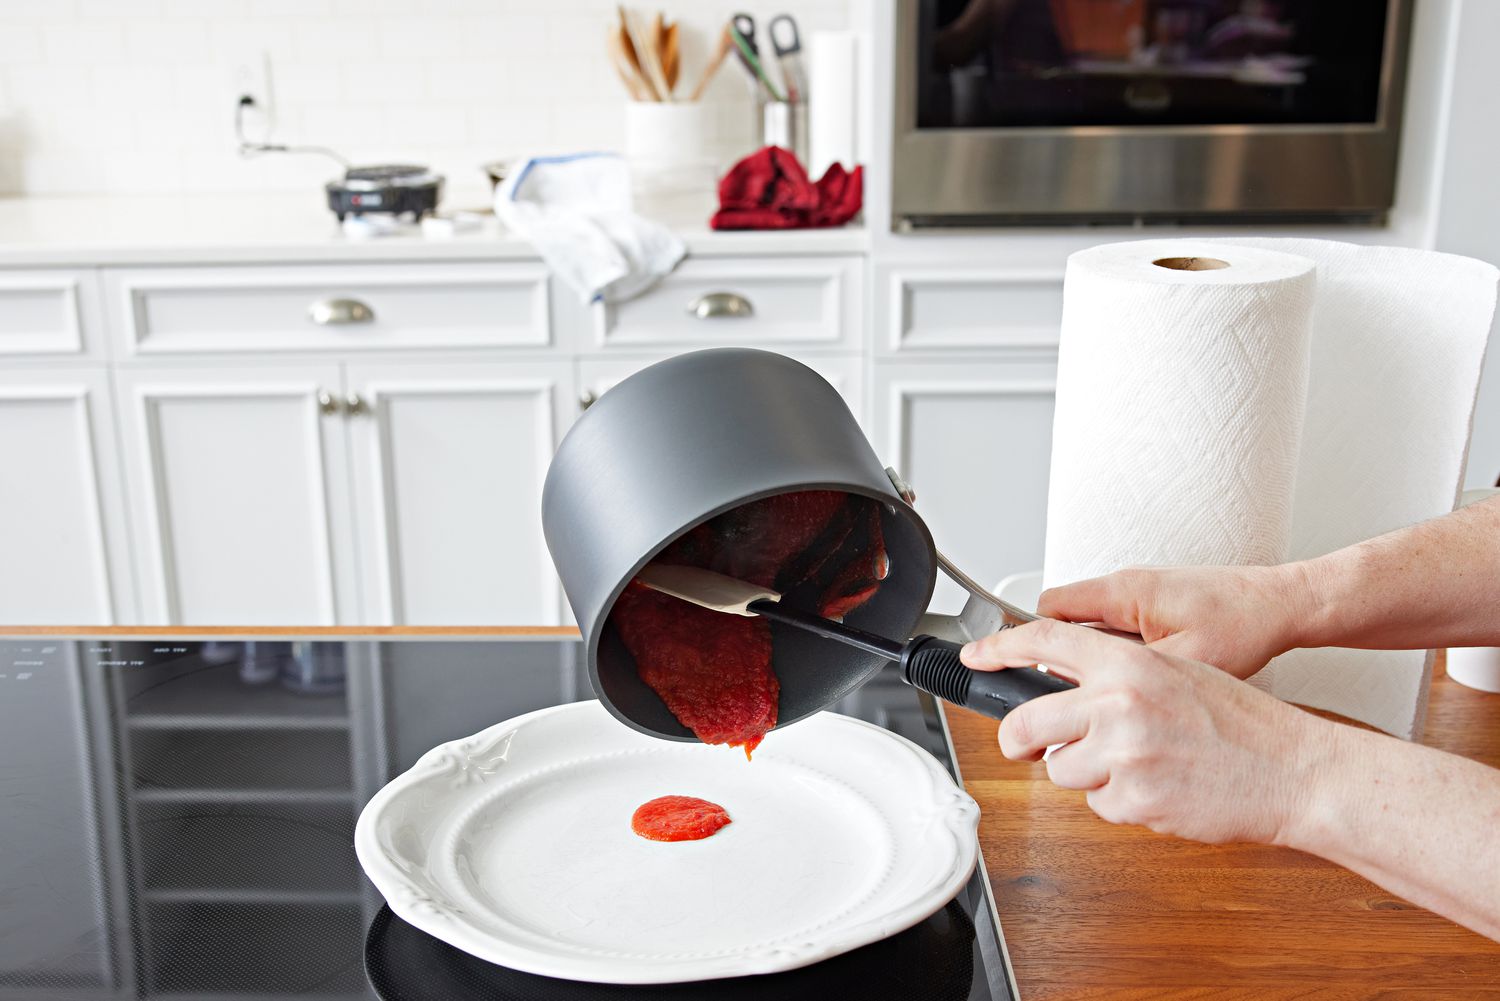 Person scraping sauce from a pot in the Calphalon Signature Nonstick 10-Piece Cookware Set onto a plate